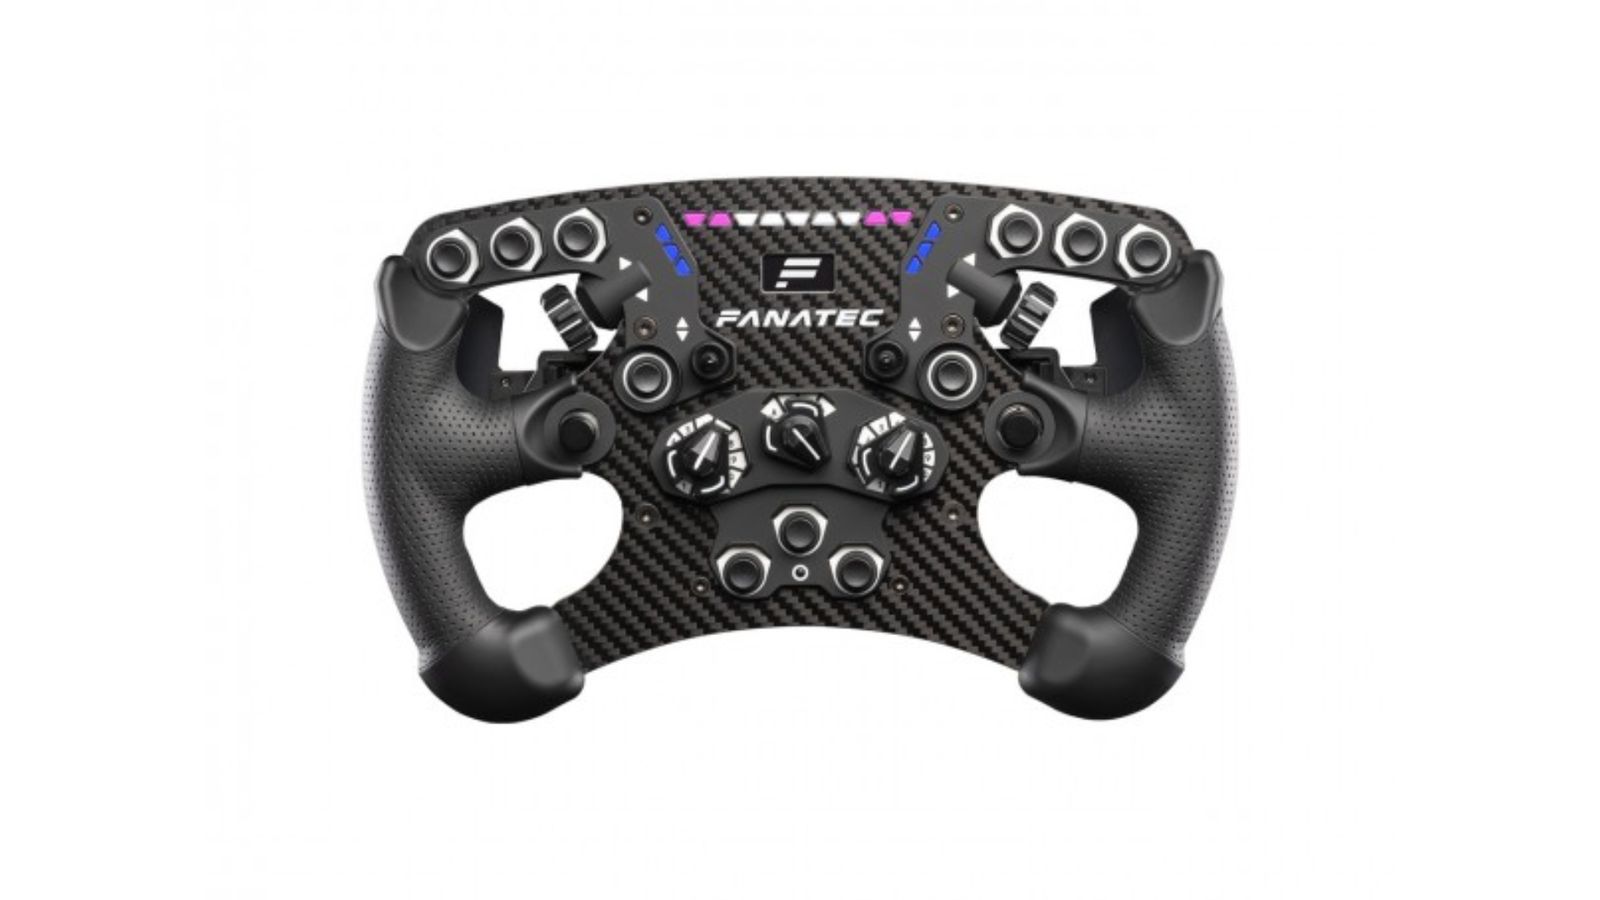 Fanatec Clubsport Steering Wheel Formula v2.5 product image of a black F1-style wheel with multiple buttons on the console.